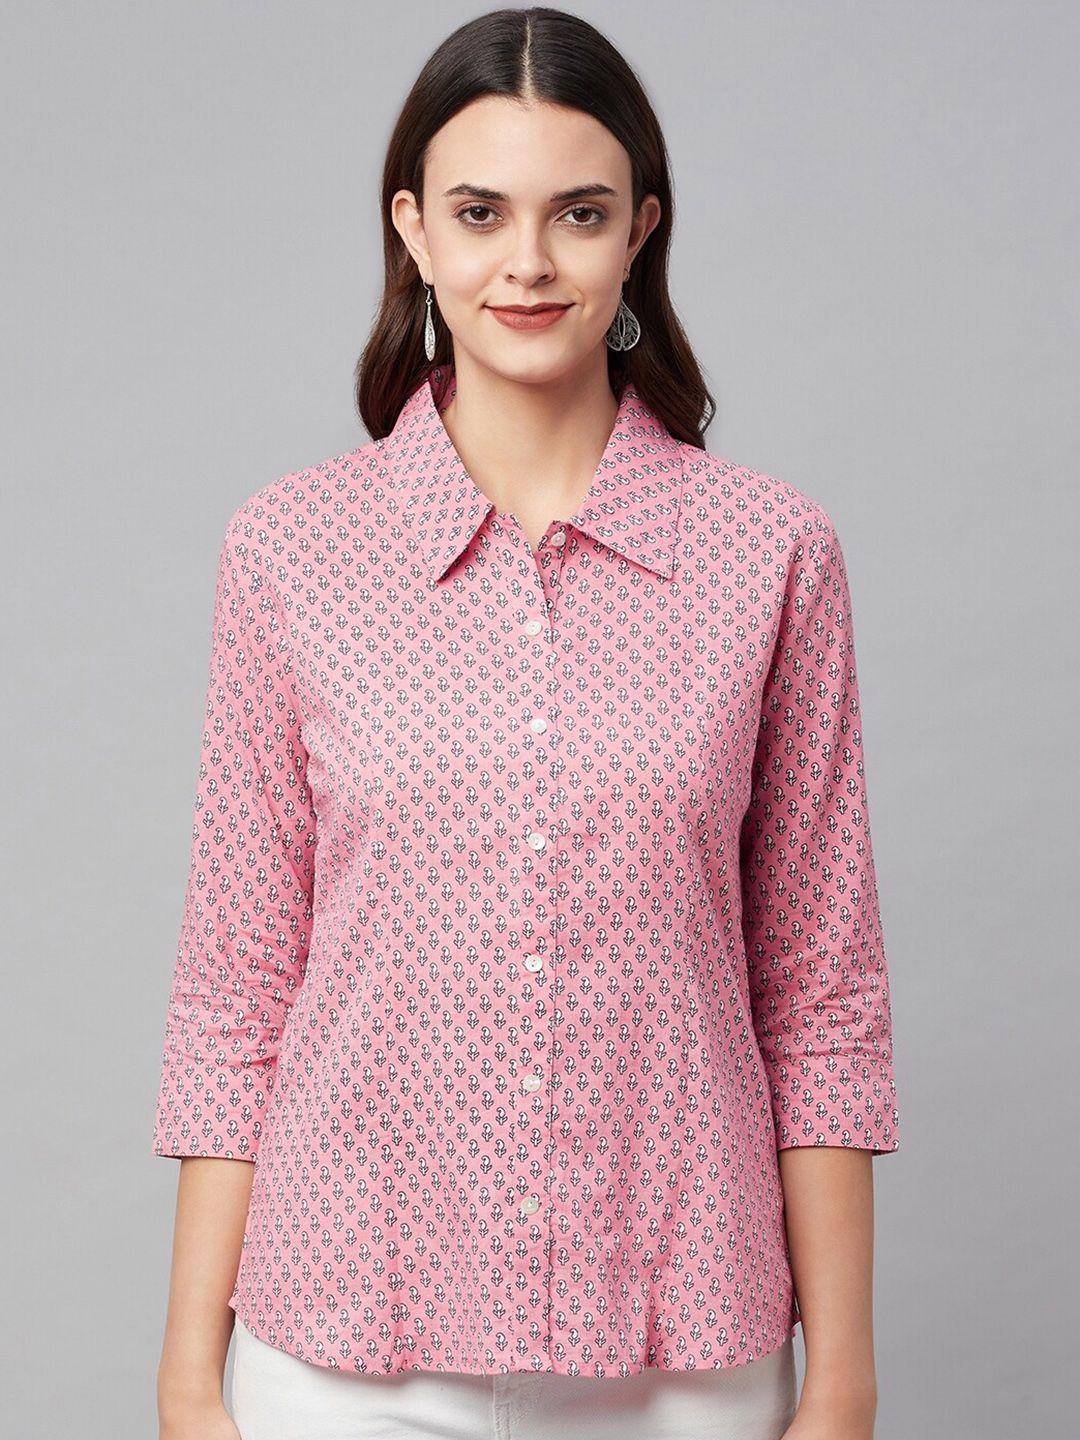 kalini comfort floral printed spread collar three-quarter sleeves cotton casual shirt